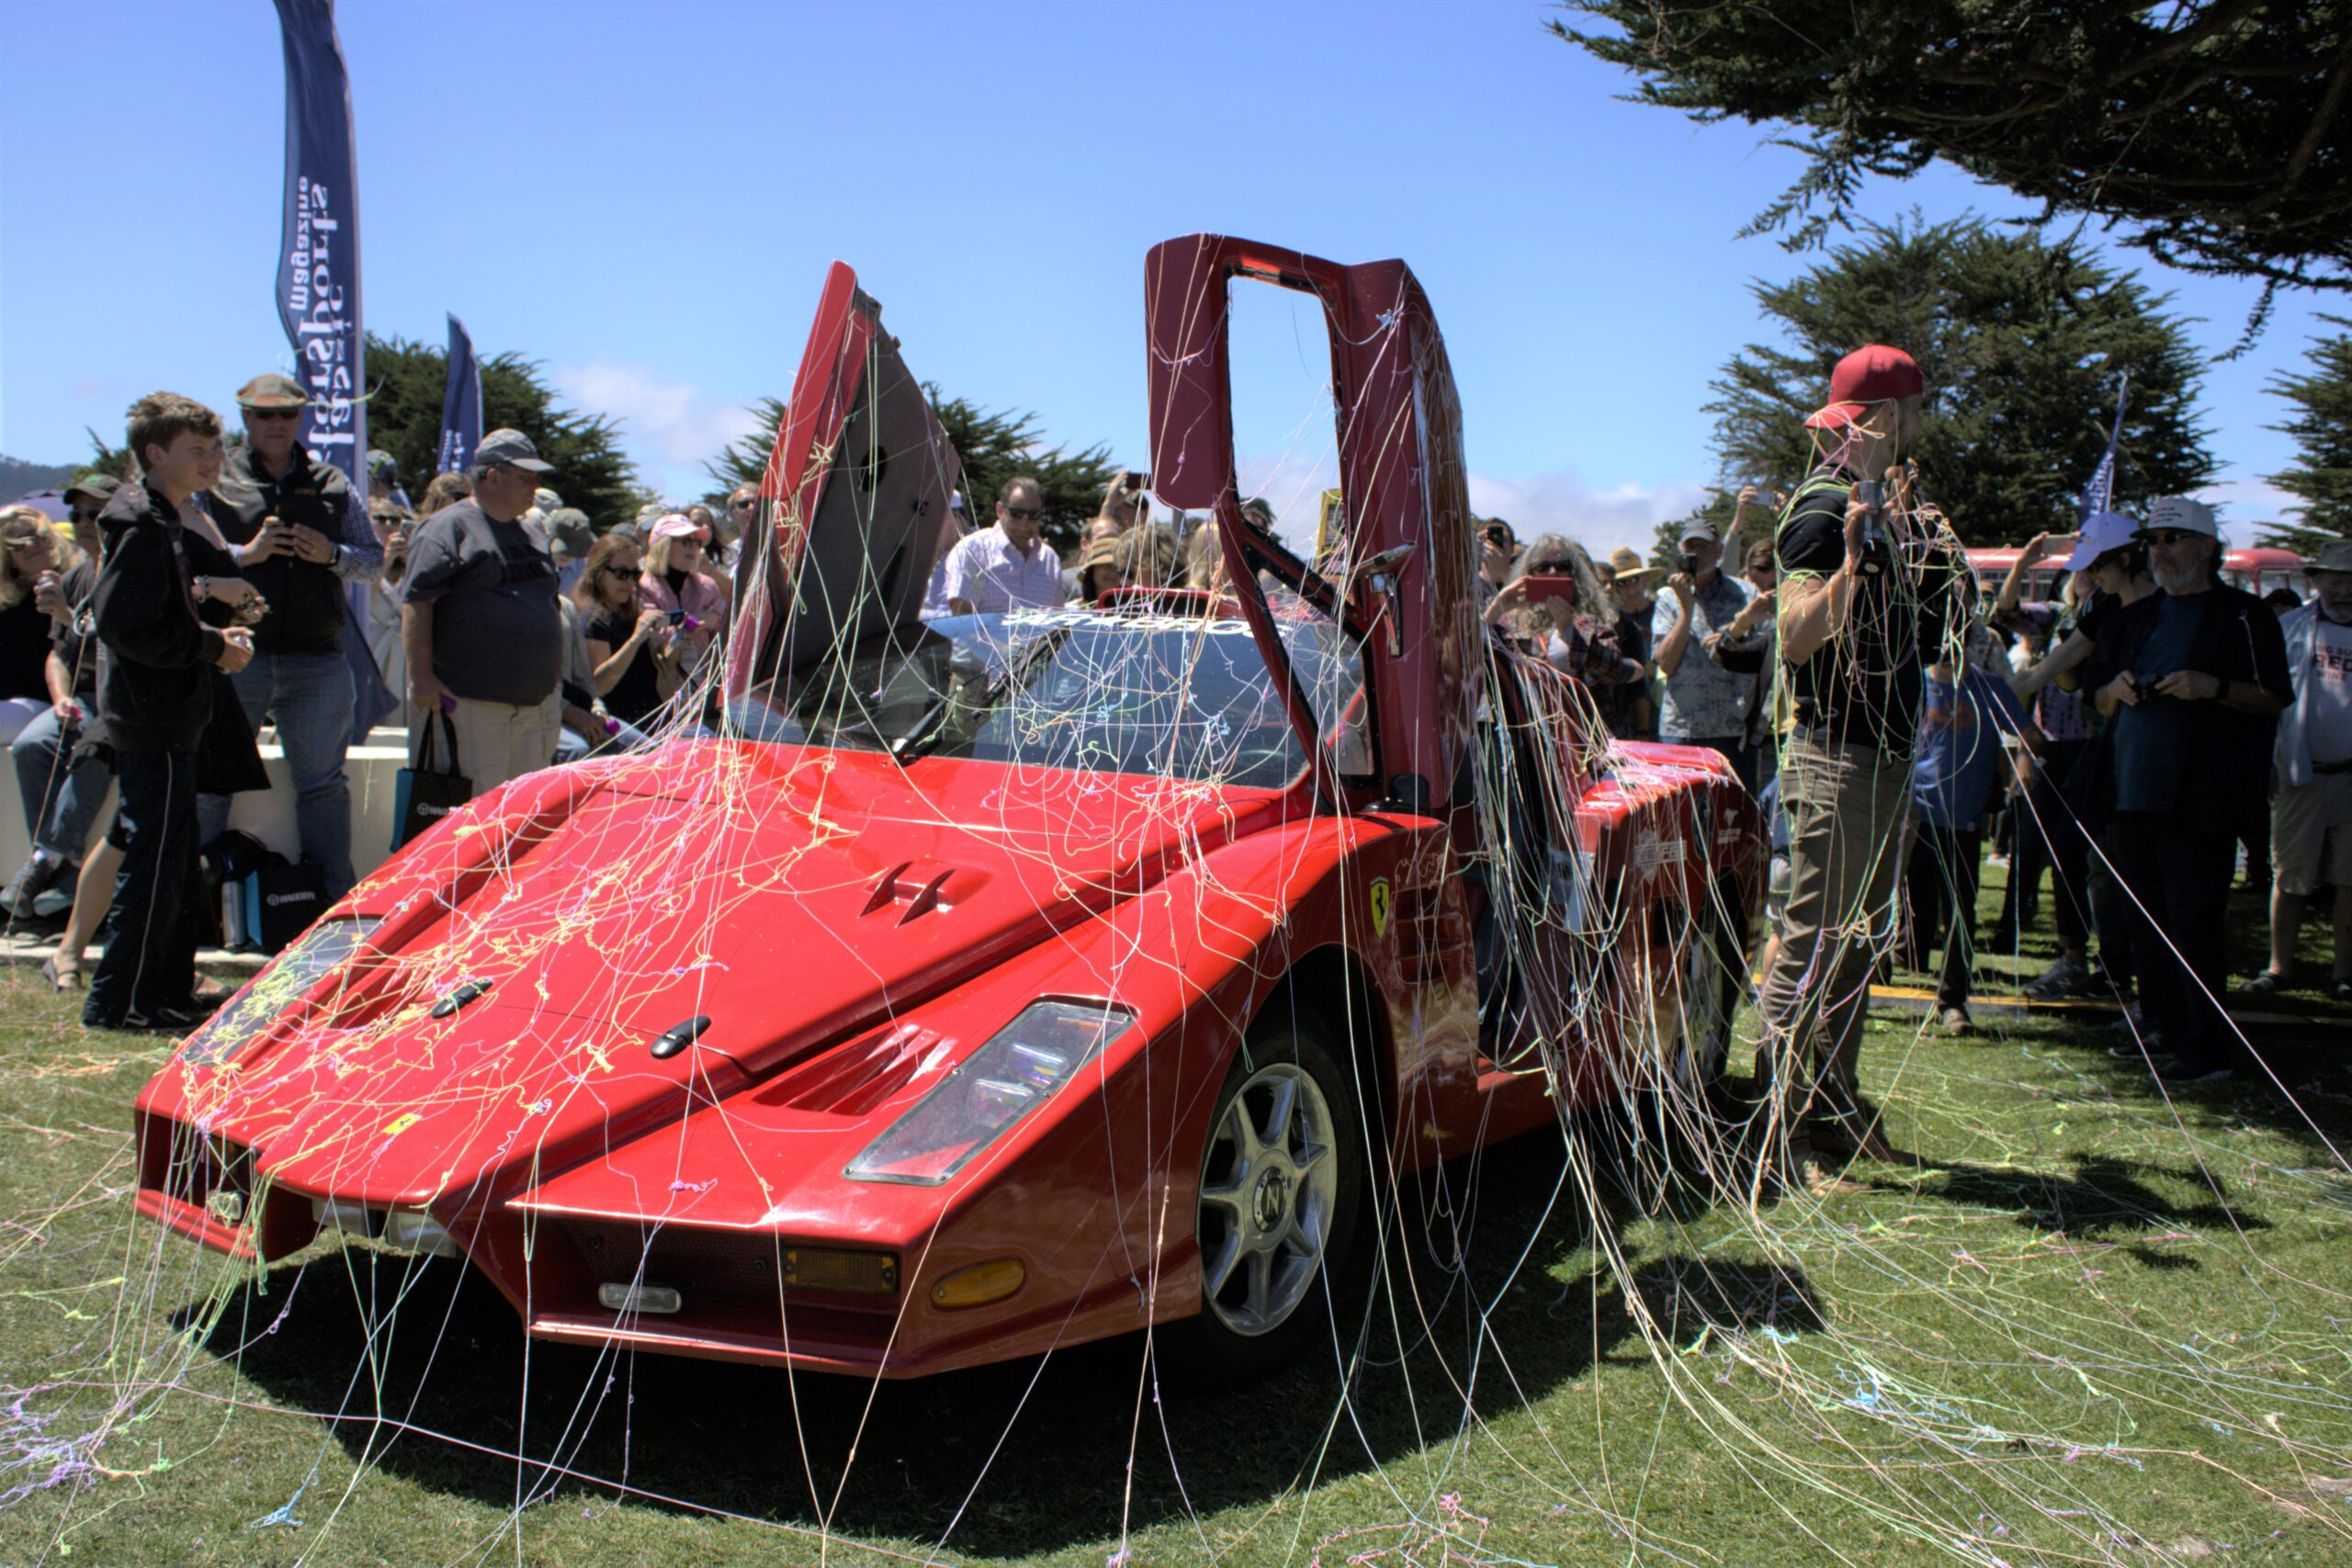 Concours d’Lemons Returns to the Monterey Peninsula Hagerty